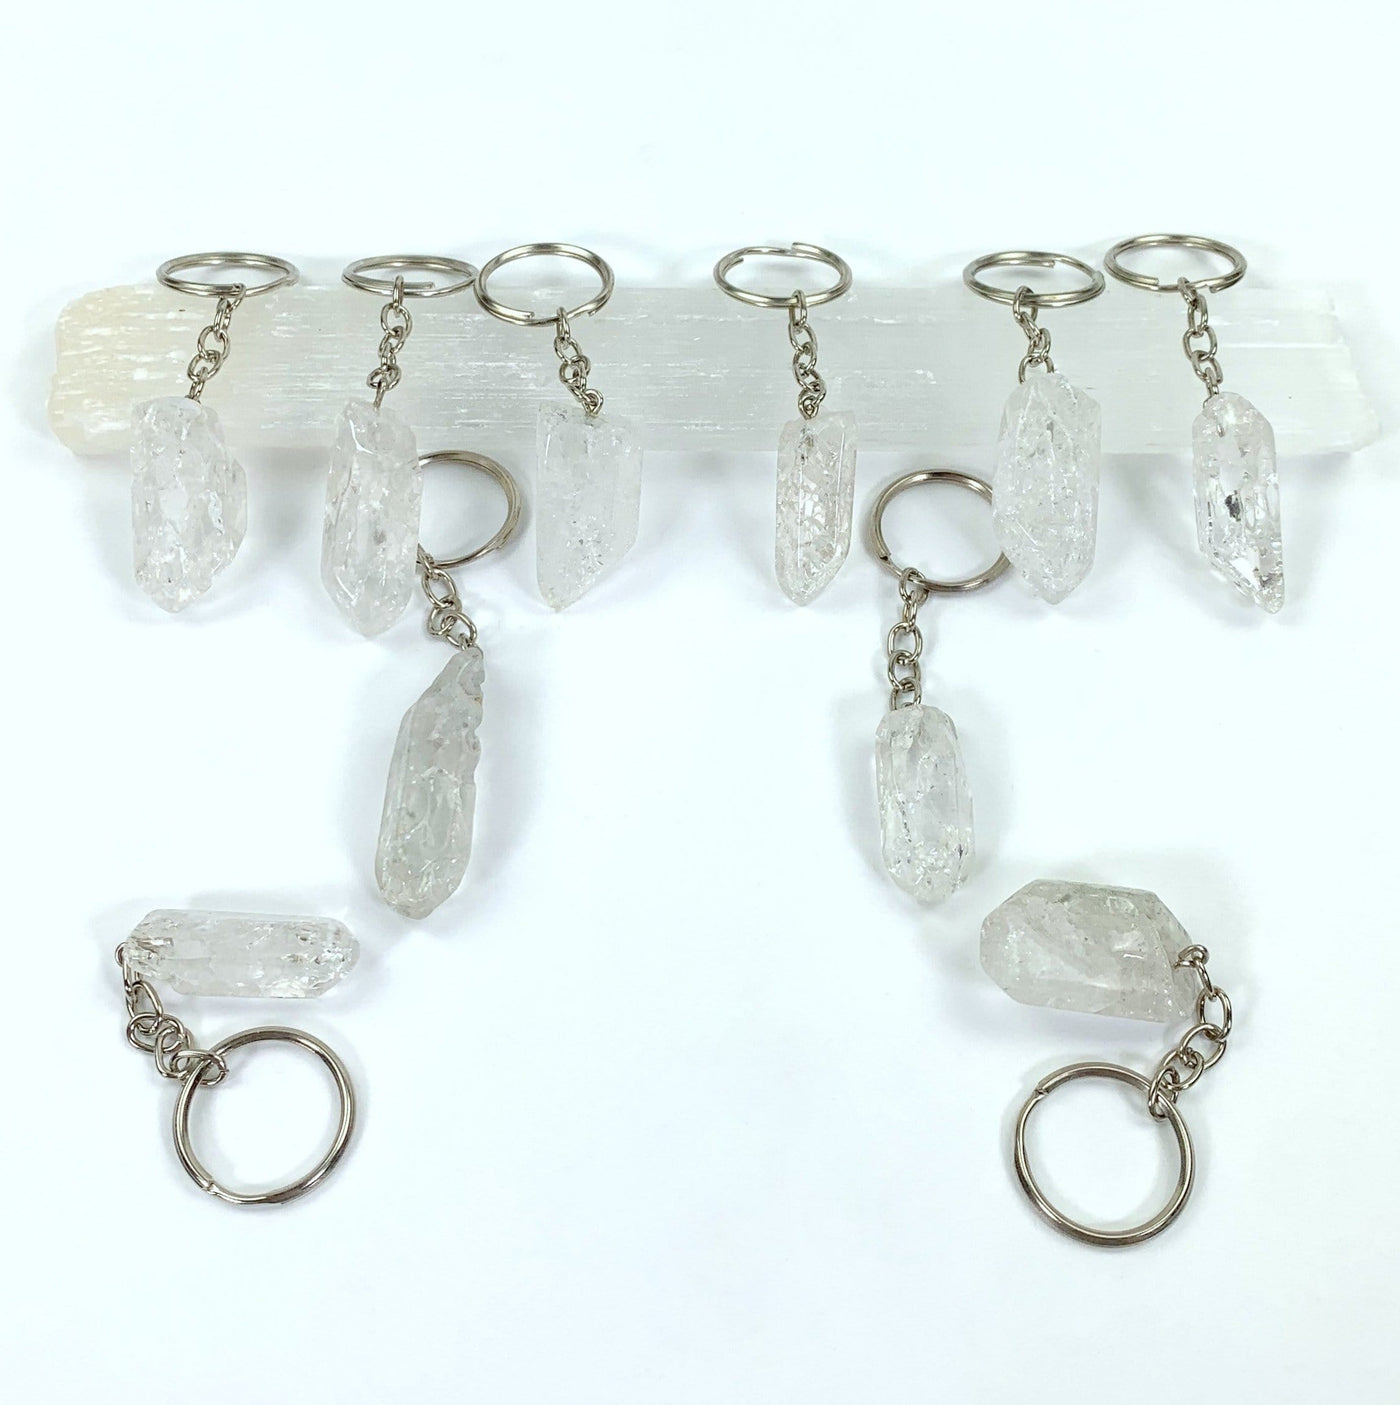 Crackle Quartz Keychains laid out to see various sizes and shapes